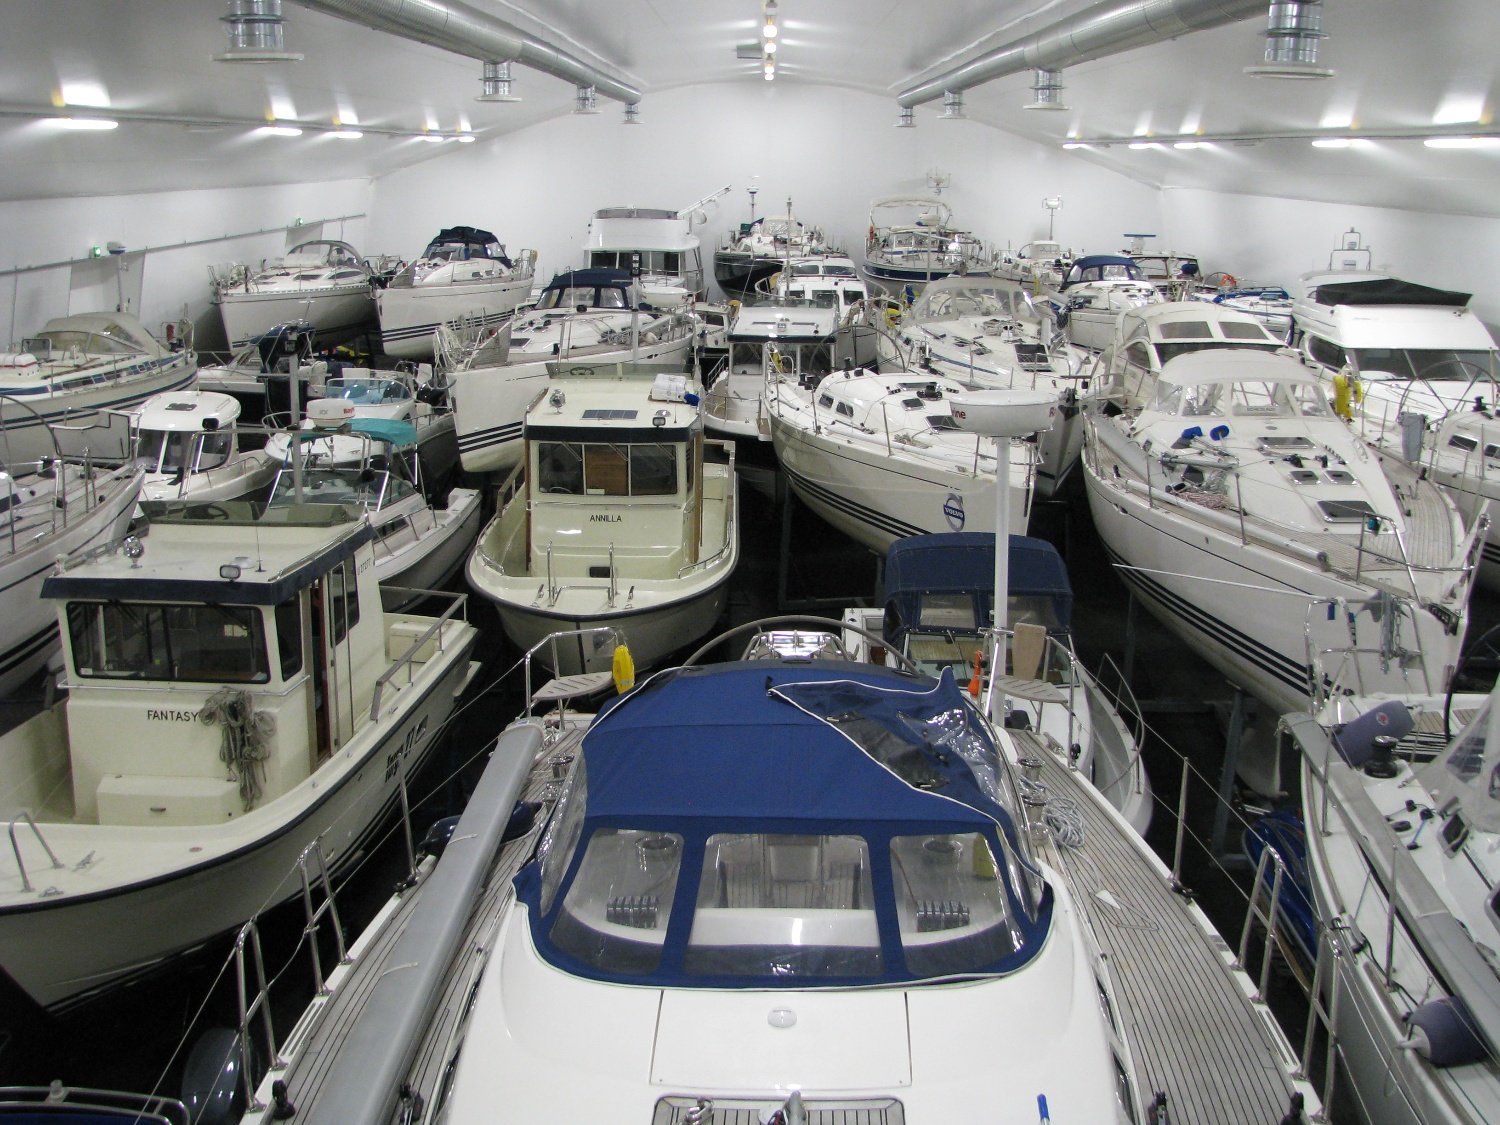 Best-Hall warehouse for storing boats